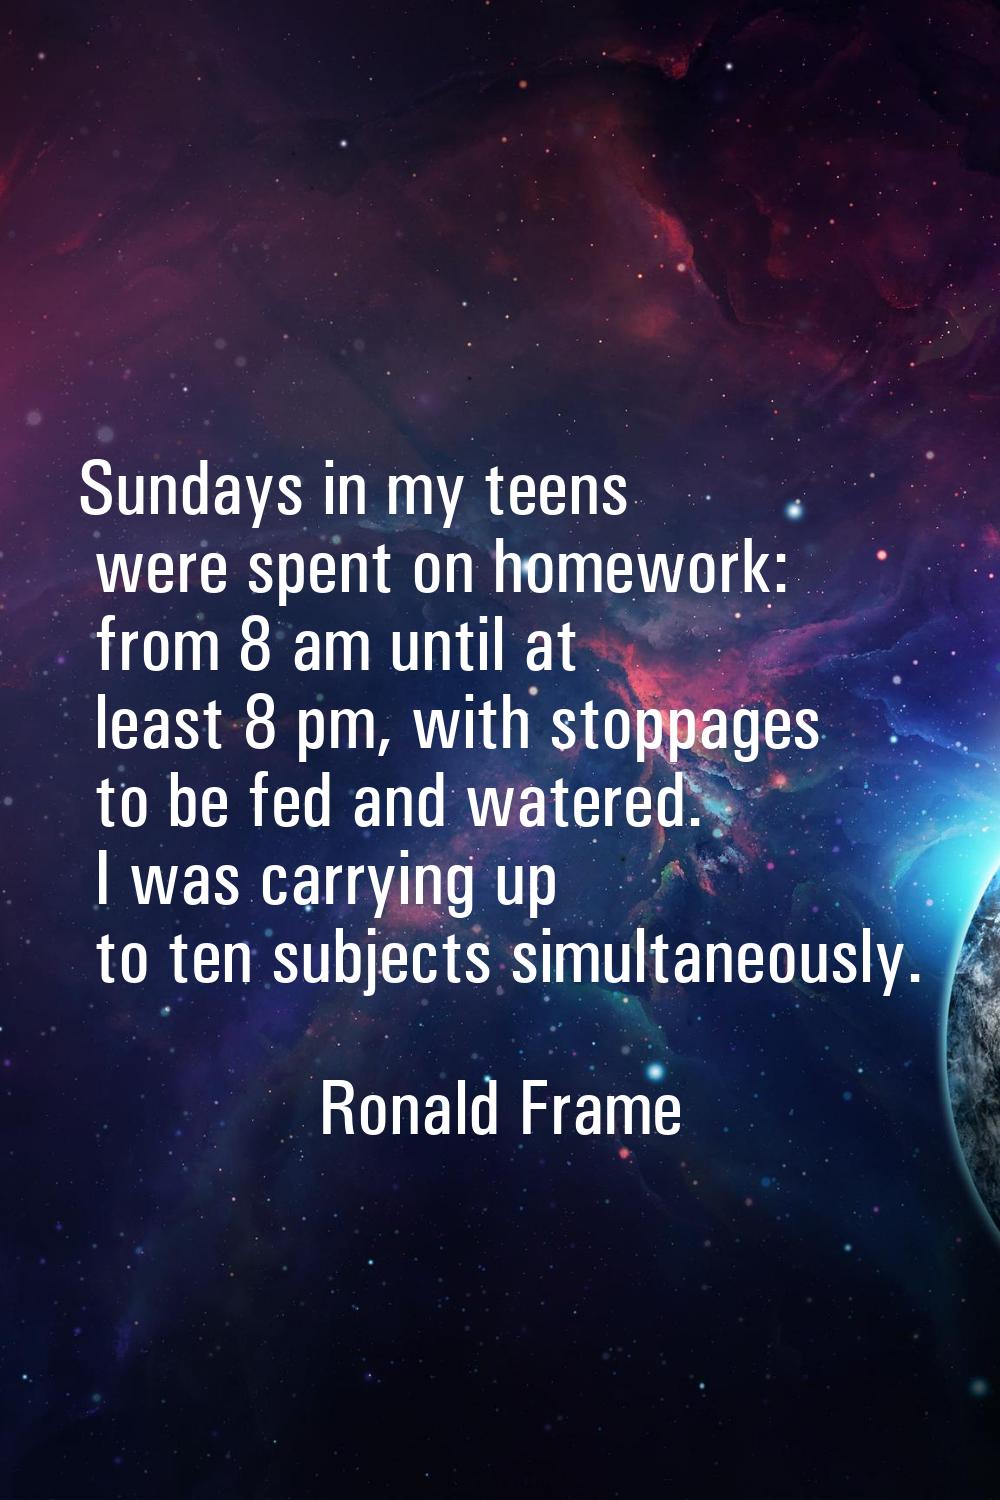 Sundays in my teens were spent on homework: from 8 am until at least 8 pm, with stoppages to be fed